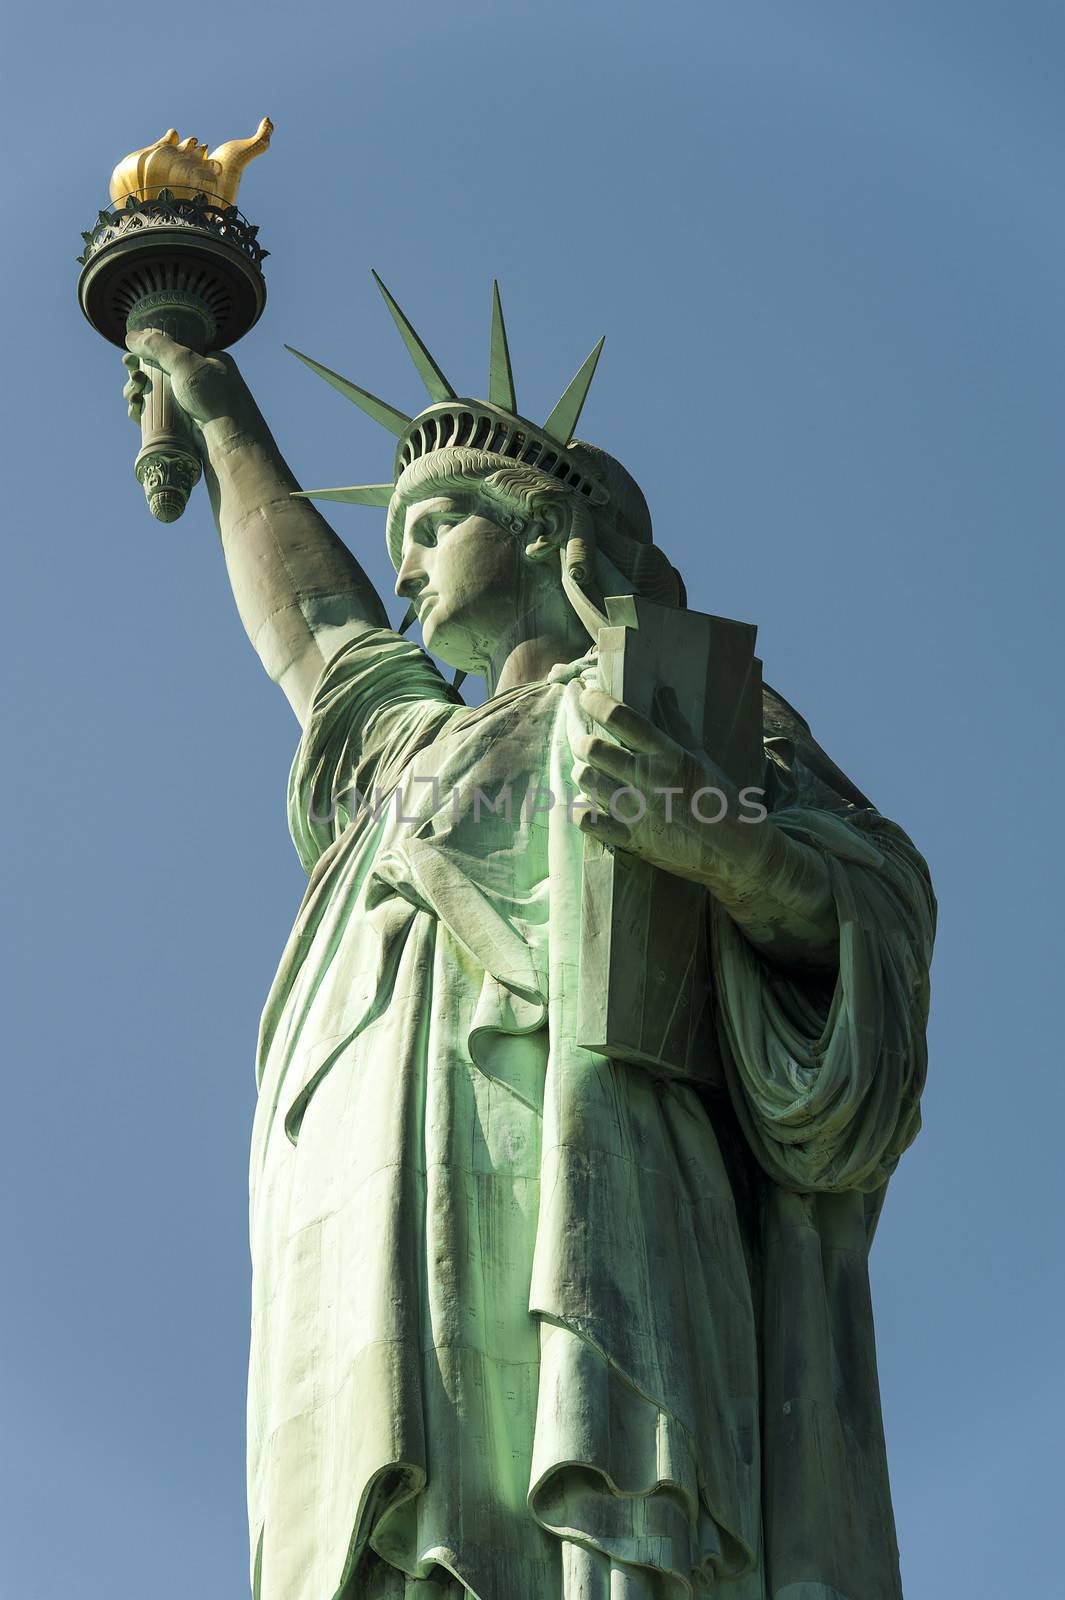 Statue of Liberty by cla78